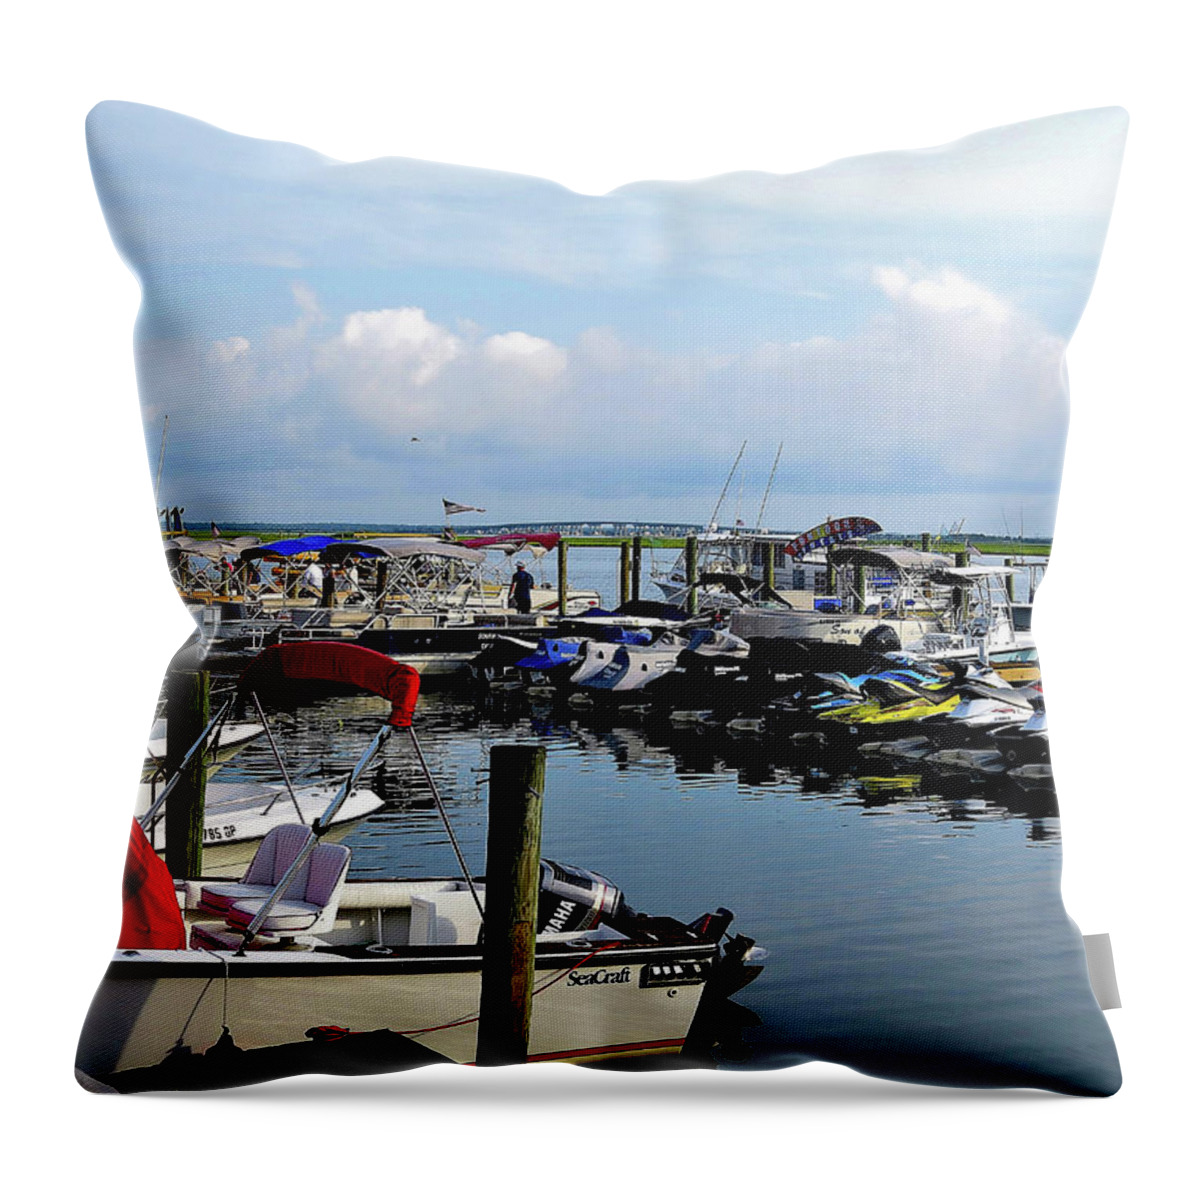 Pontoon Rentals Throw Pillow featuring the photograph Boat Moorings and Rentals in Wildwood New Jersey by Linda Stern